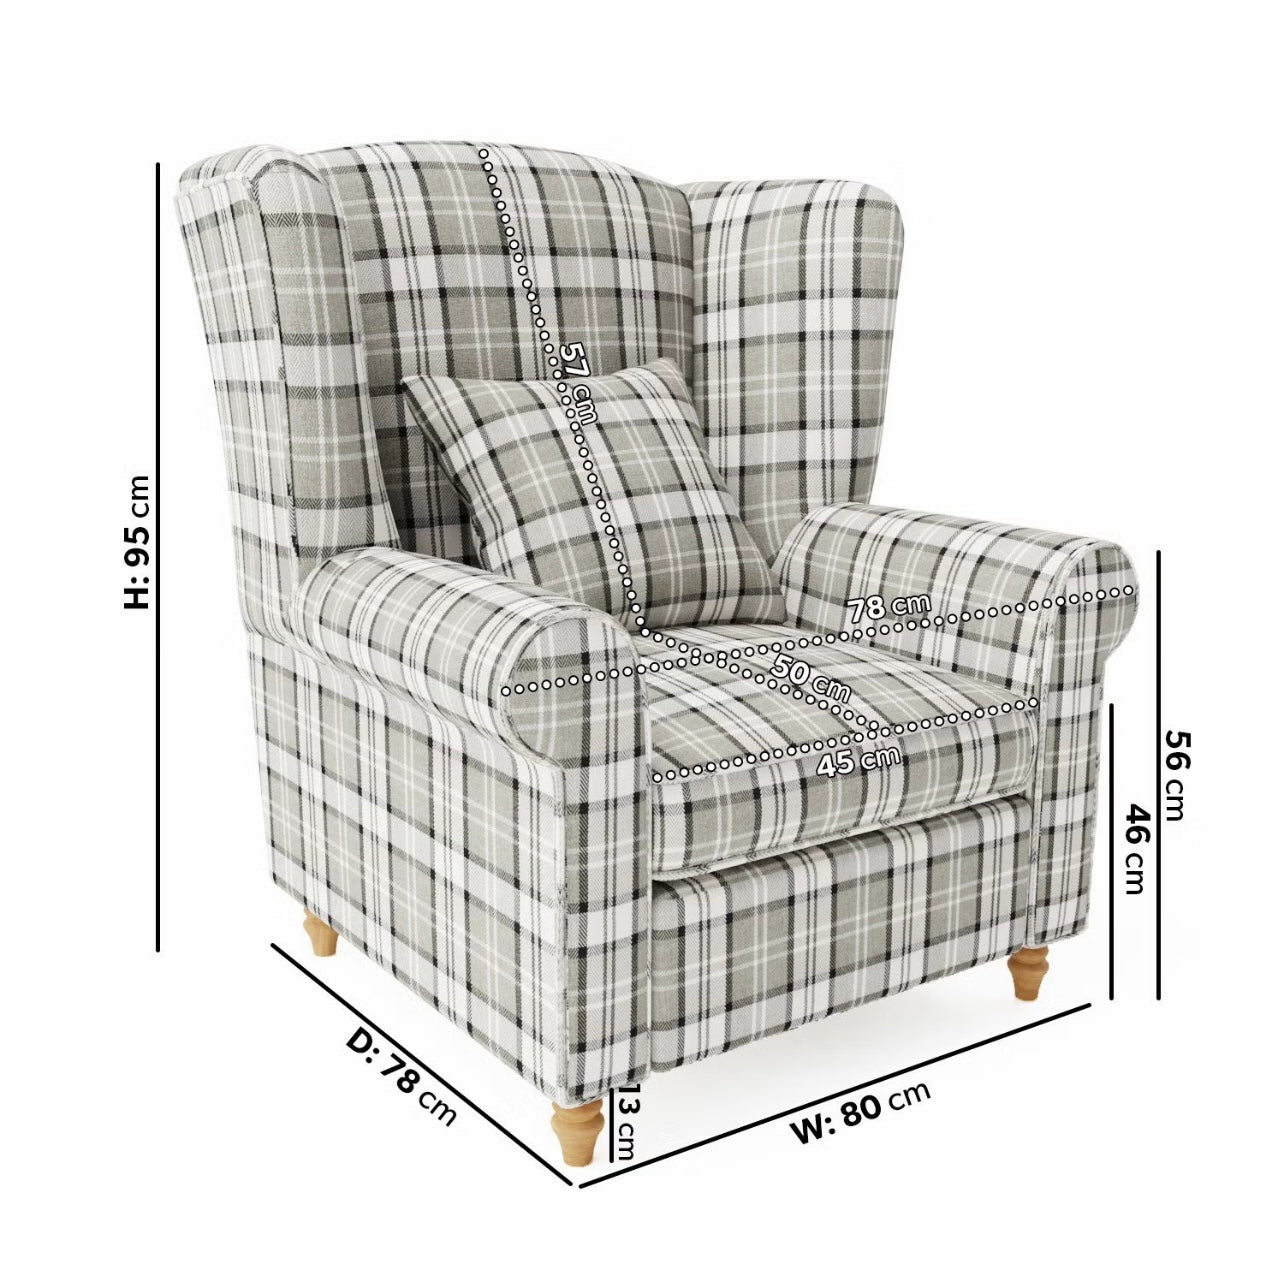 Fabric Armchair with Supportive Back